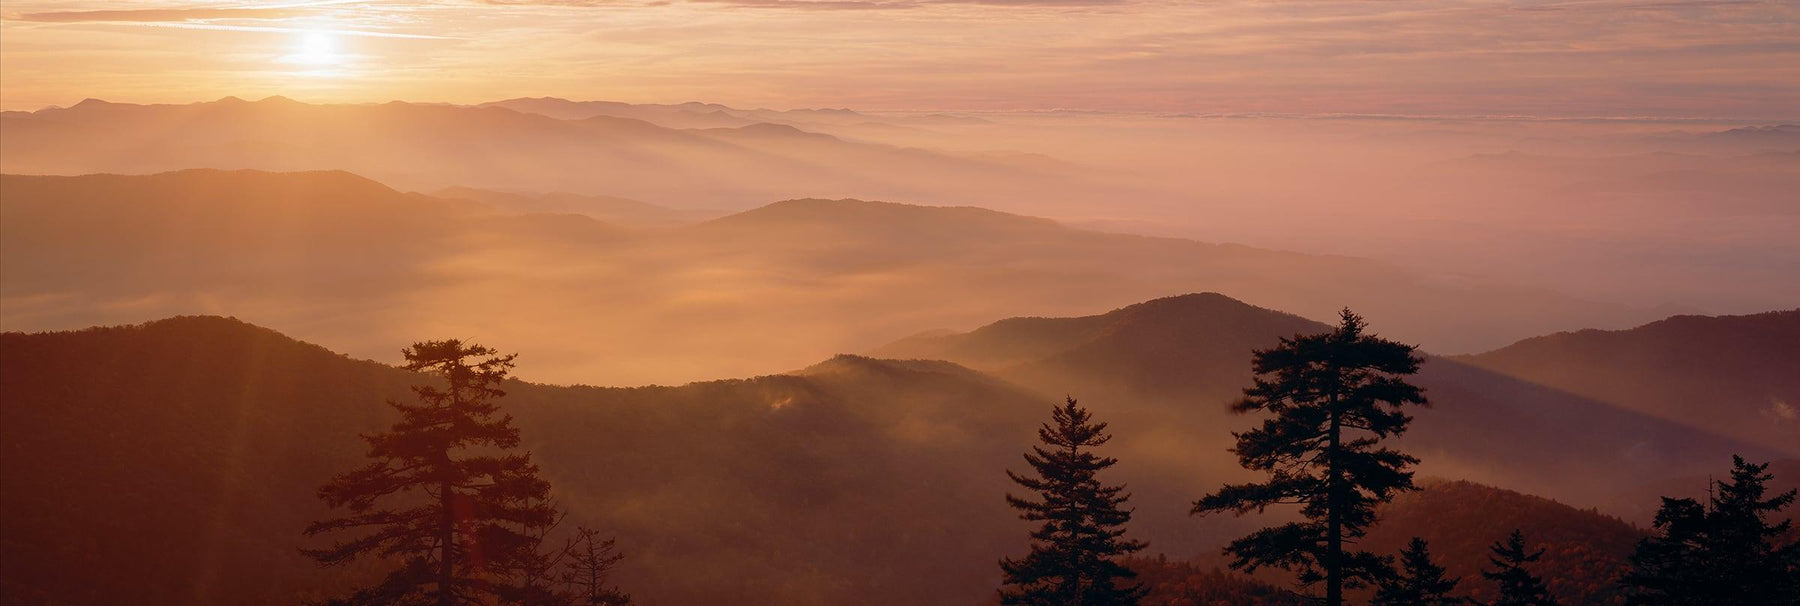 Sun setting over the misty mountain tops of the Great Smoky Mountains National Park Tennessee